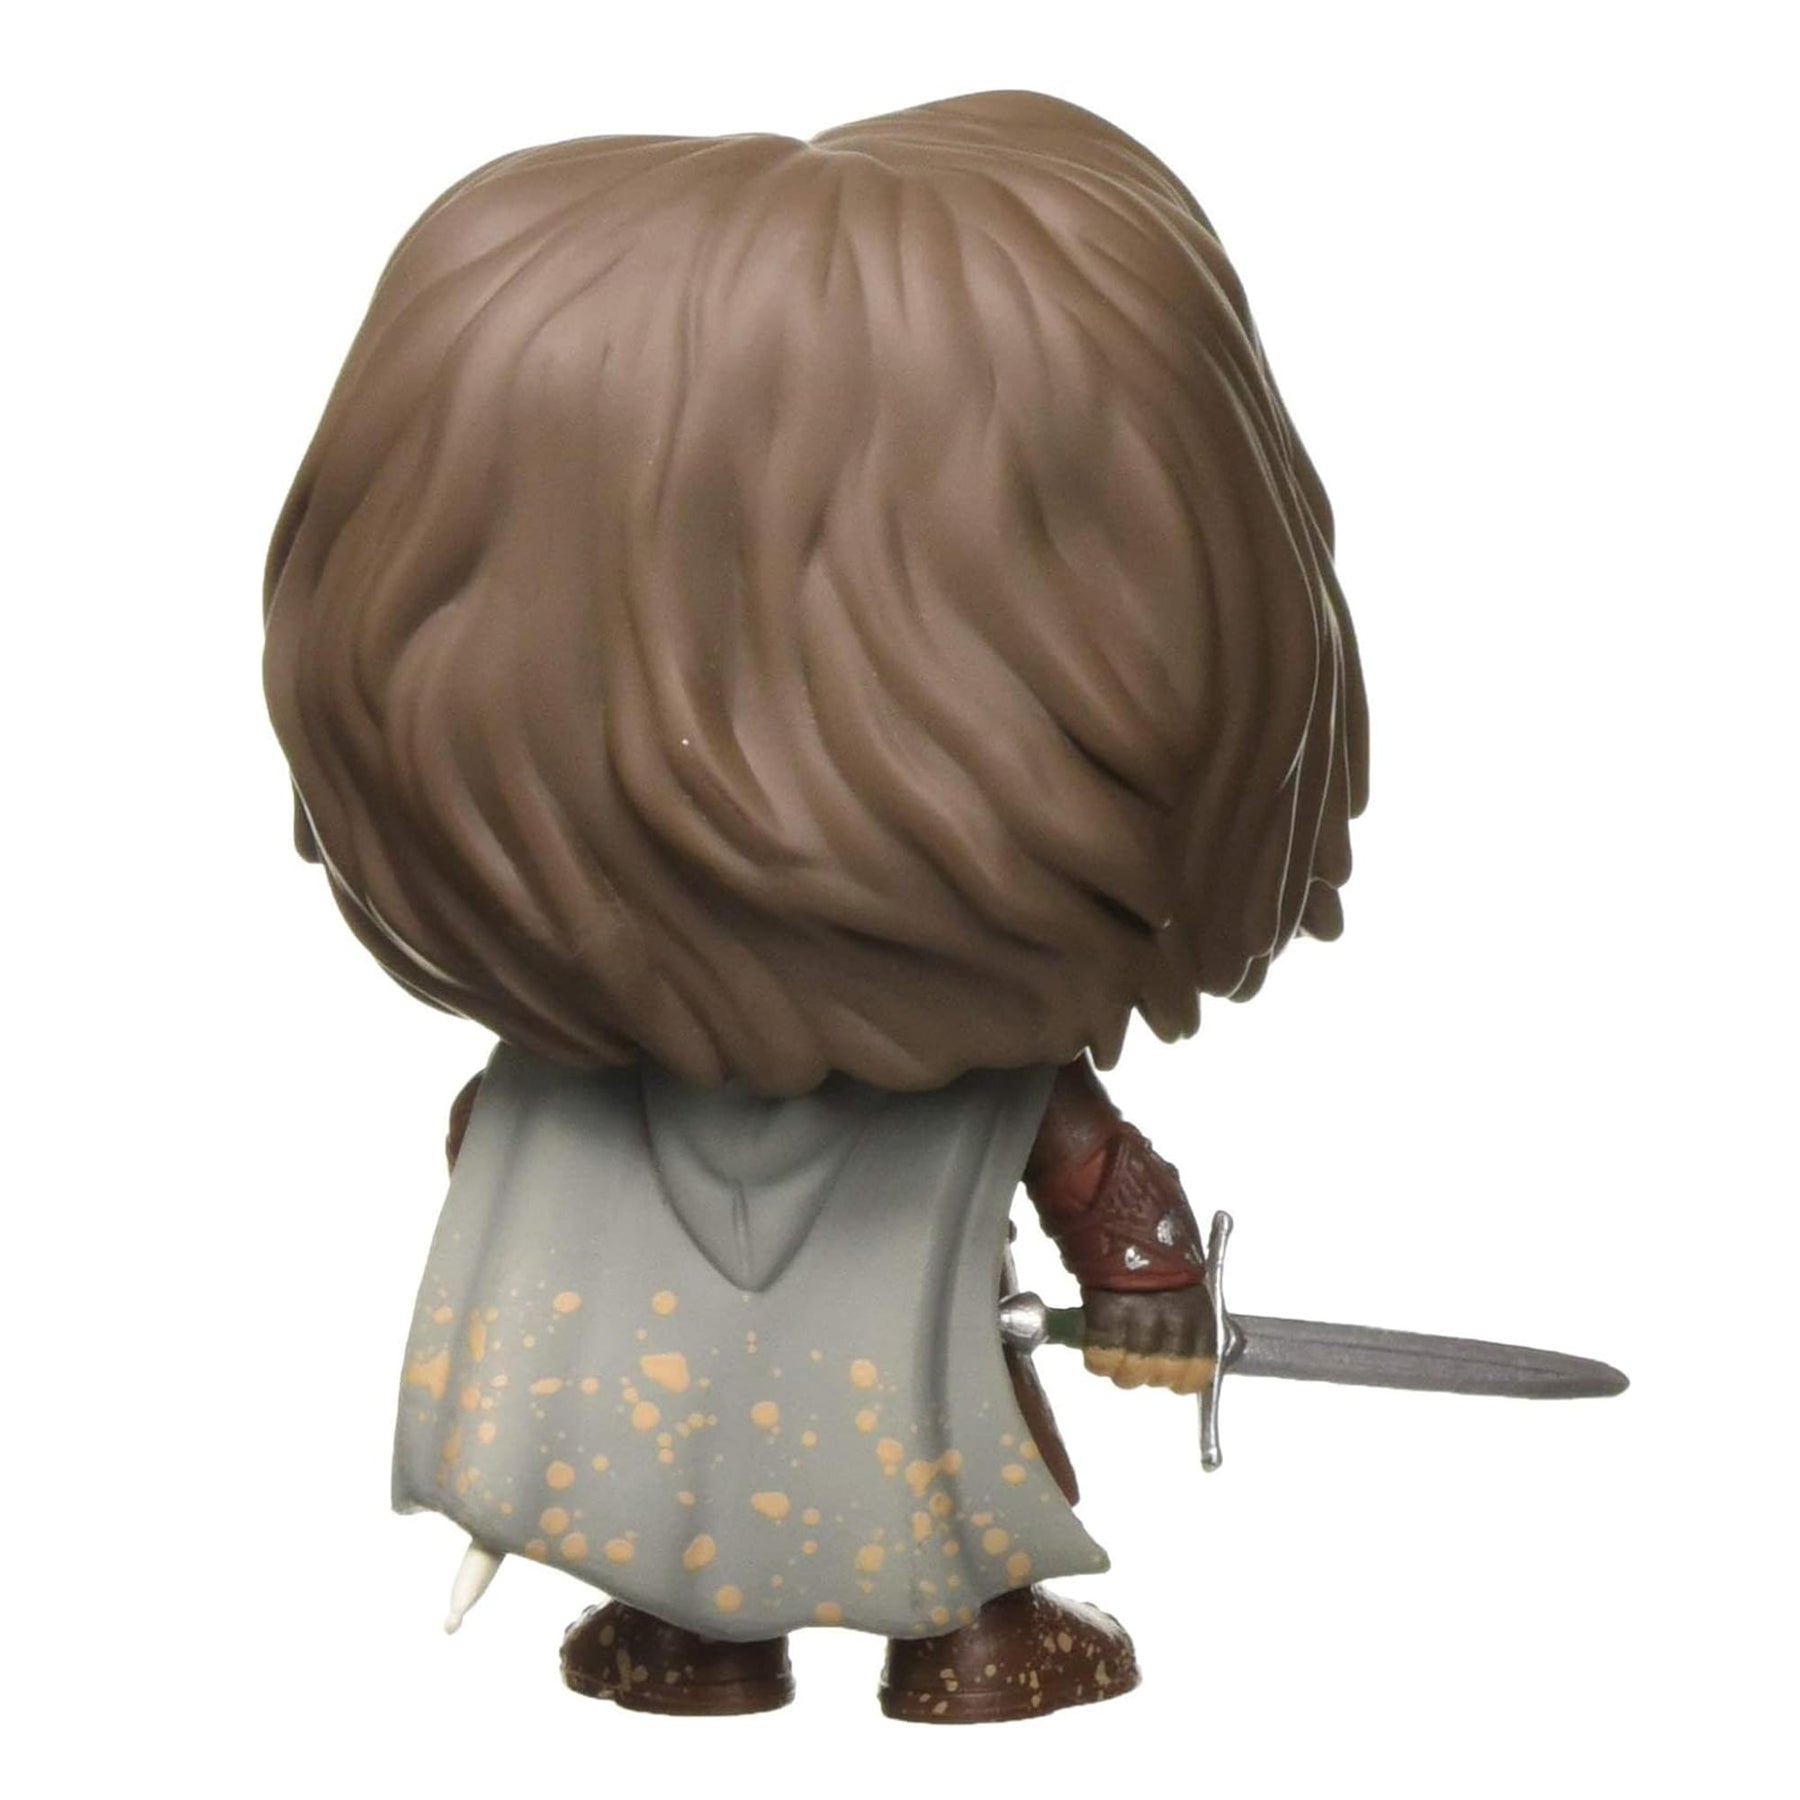 The Lord of the Rings Funko POP | Aragorn